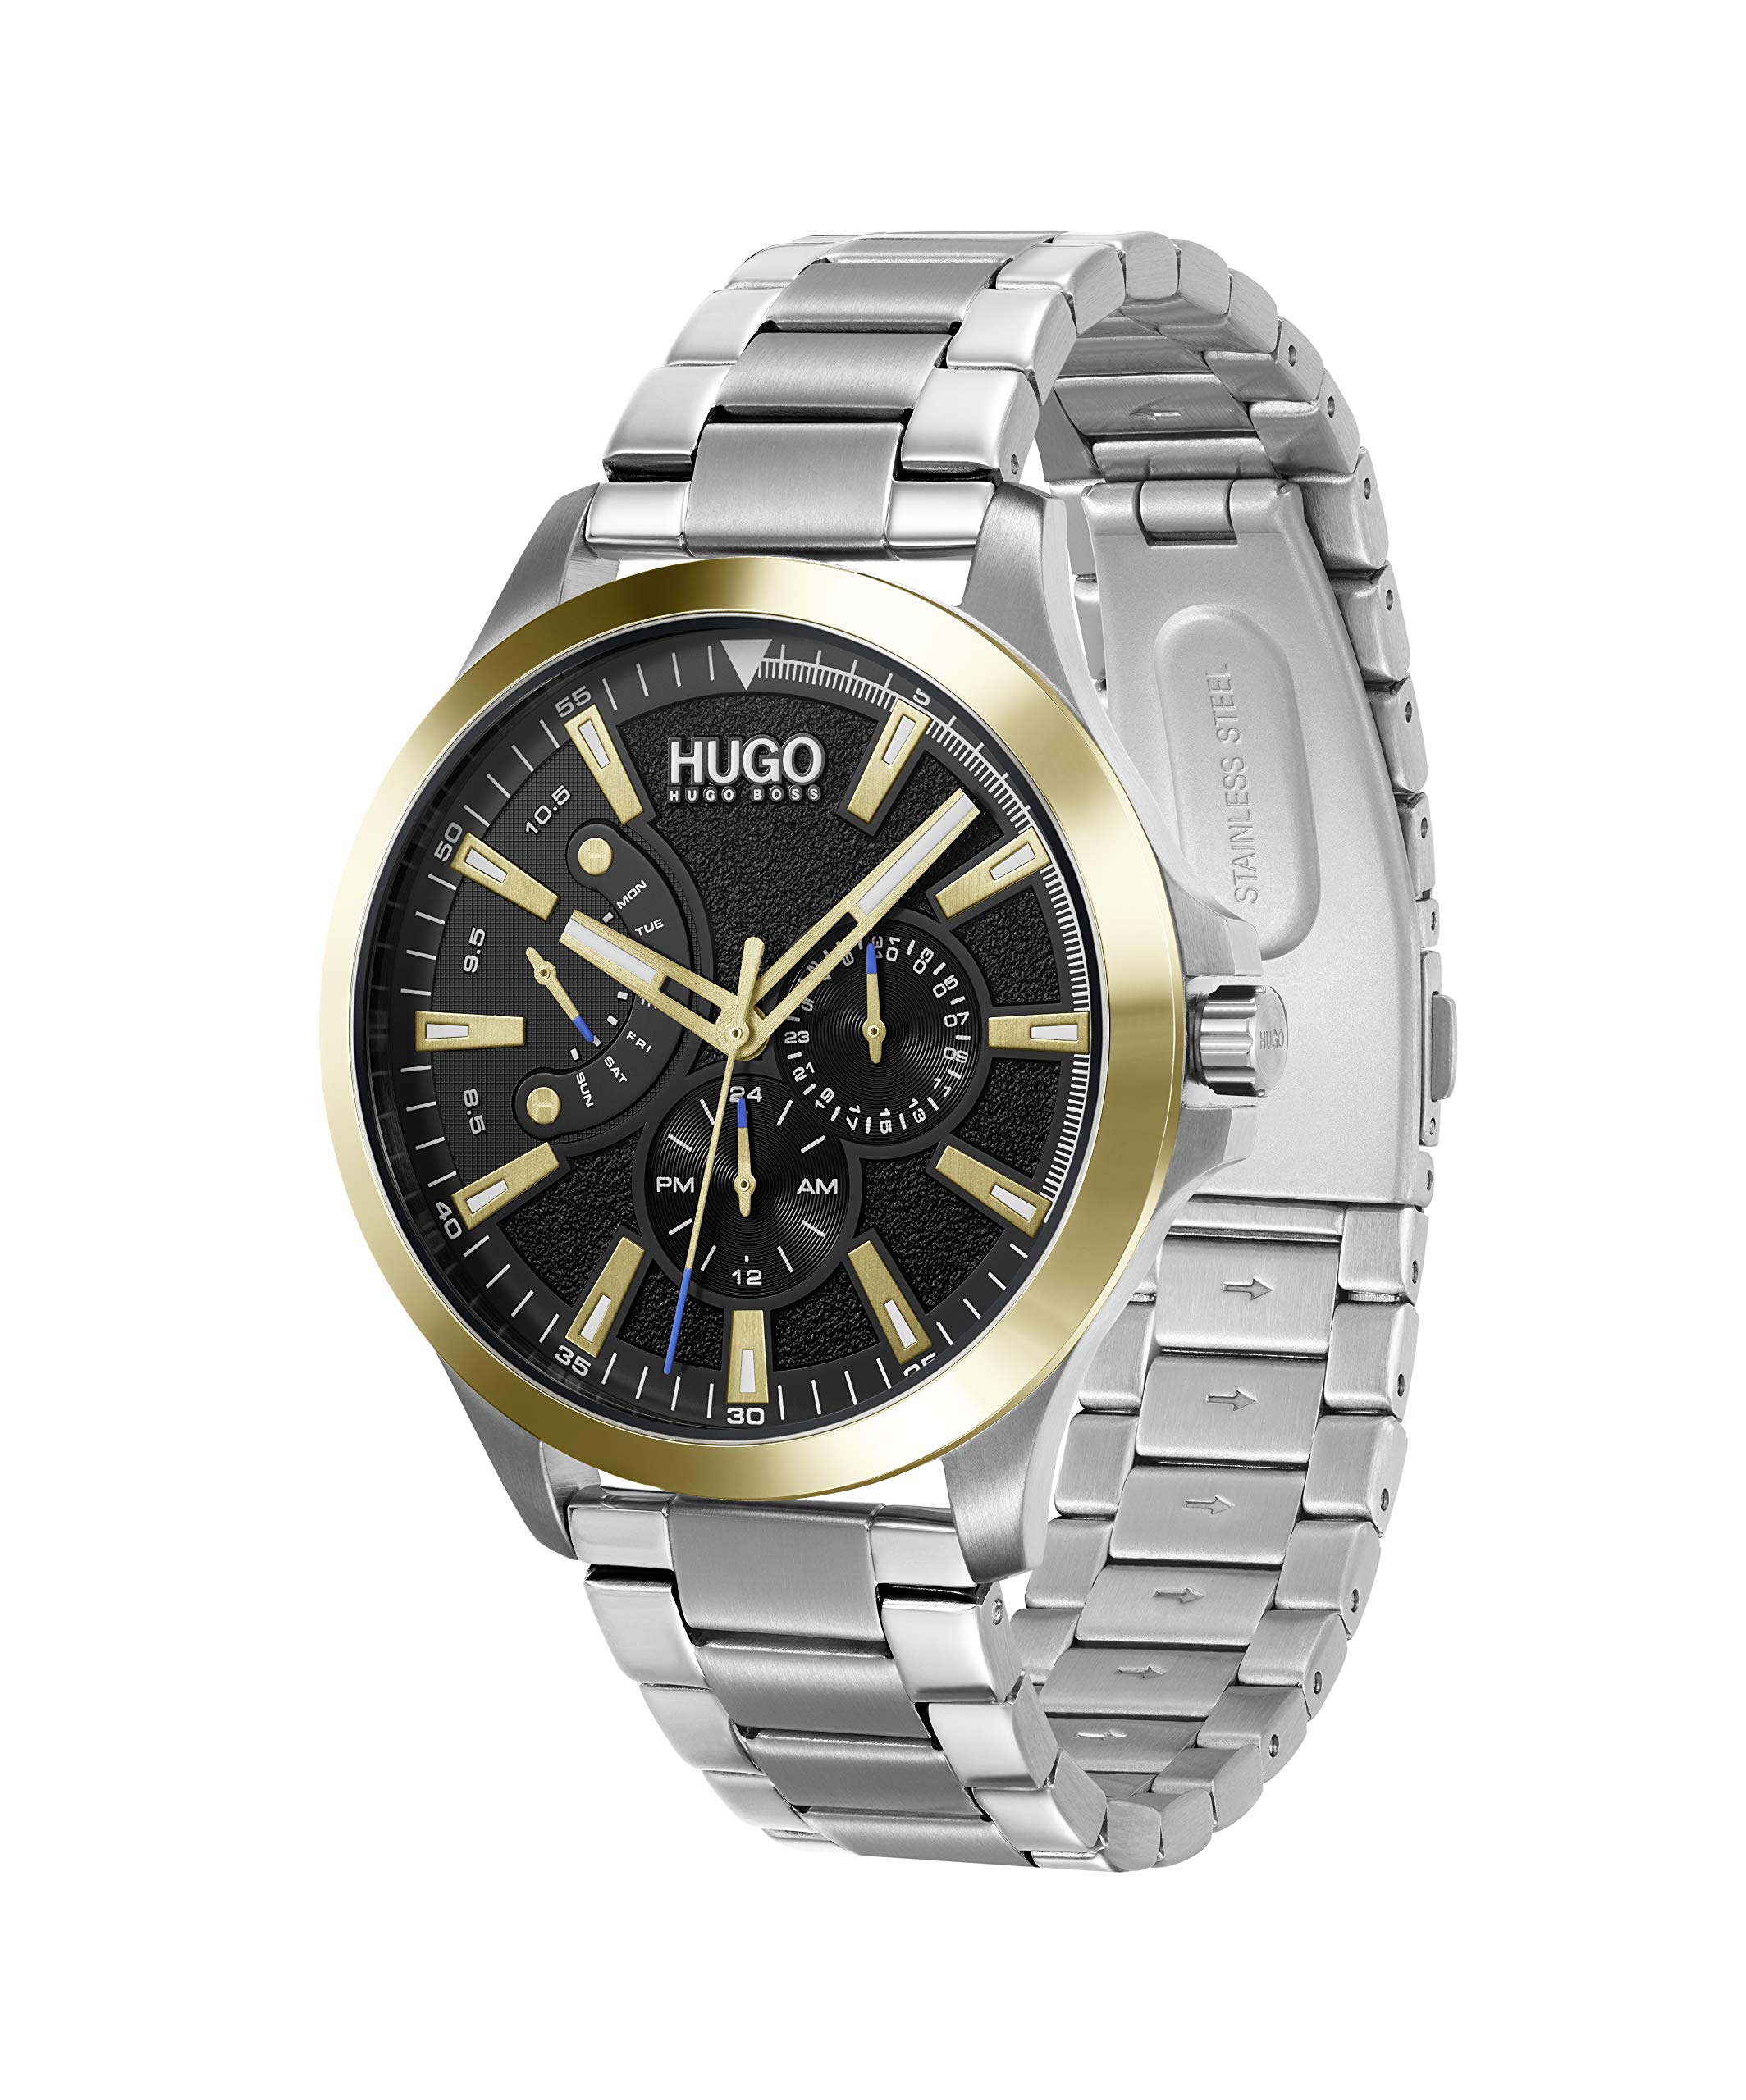 HUGO #LEAP Men's Multifunction Stainless Steel and Link Bracelet Casual Watch, Color: Silver (Model: 1530174)